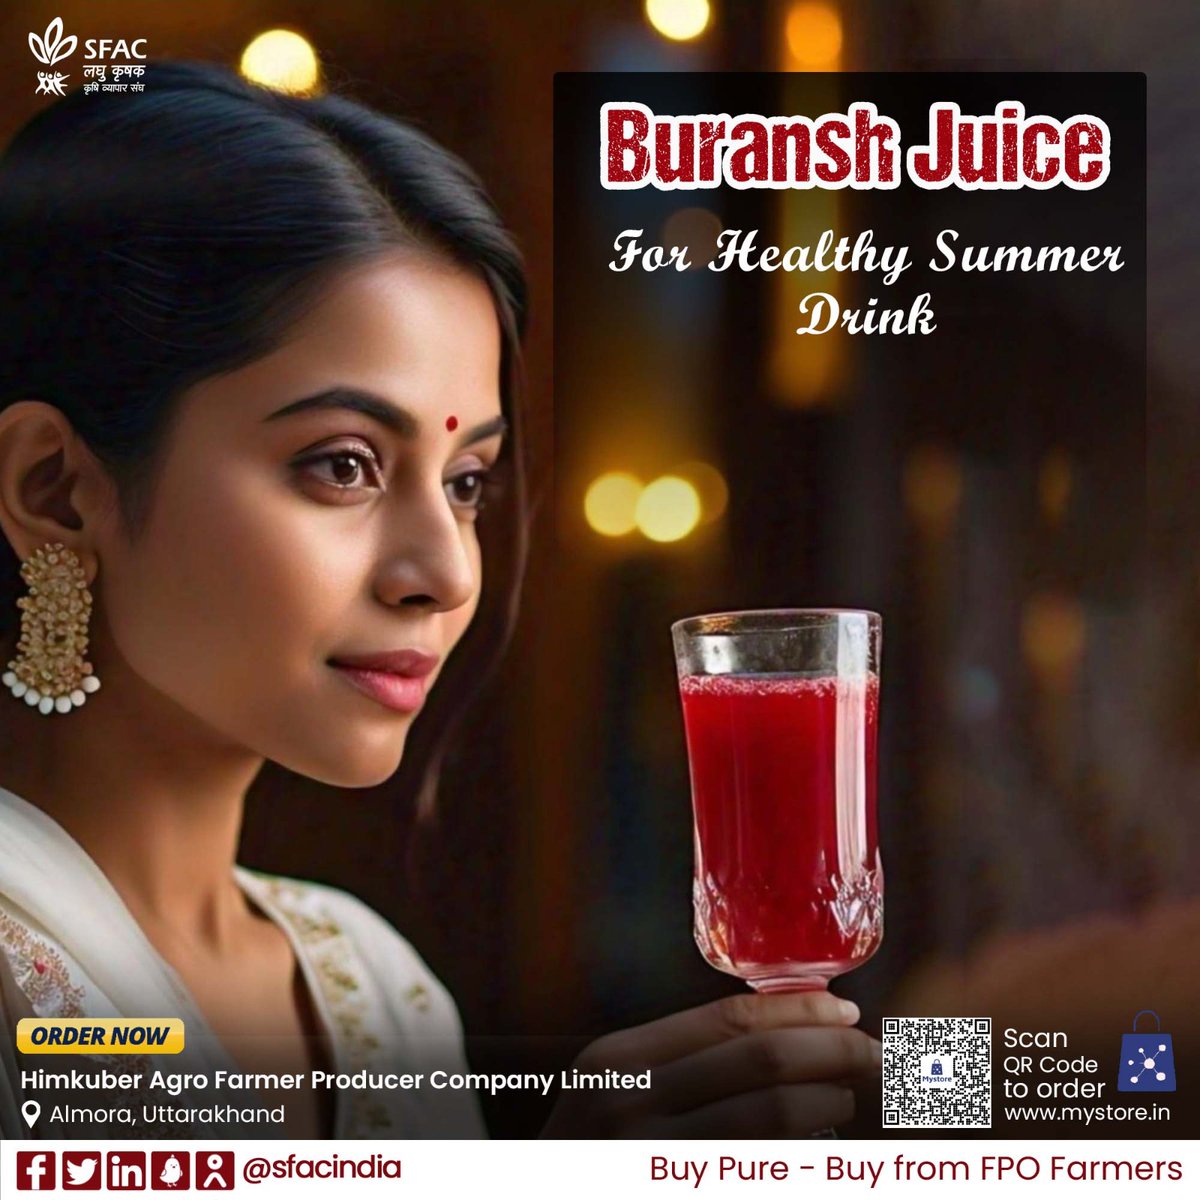 This summer, beat the heat deliciously. Drink vitamin C-enriched pure buransh juice & revive yourself naturally.

Buy from FPO farmers at👇

mystore.in/en/product/bur…

🧃🍹

 #VocalForLocal #healthydrink #healthyhabits #healthychoices #tastyrecipes #SummerVibes